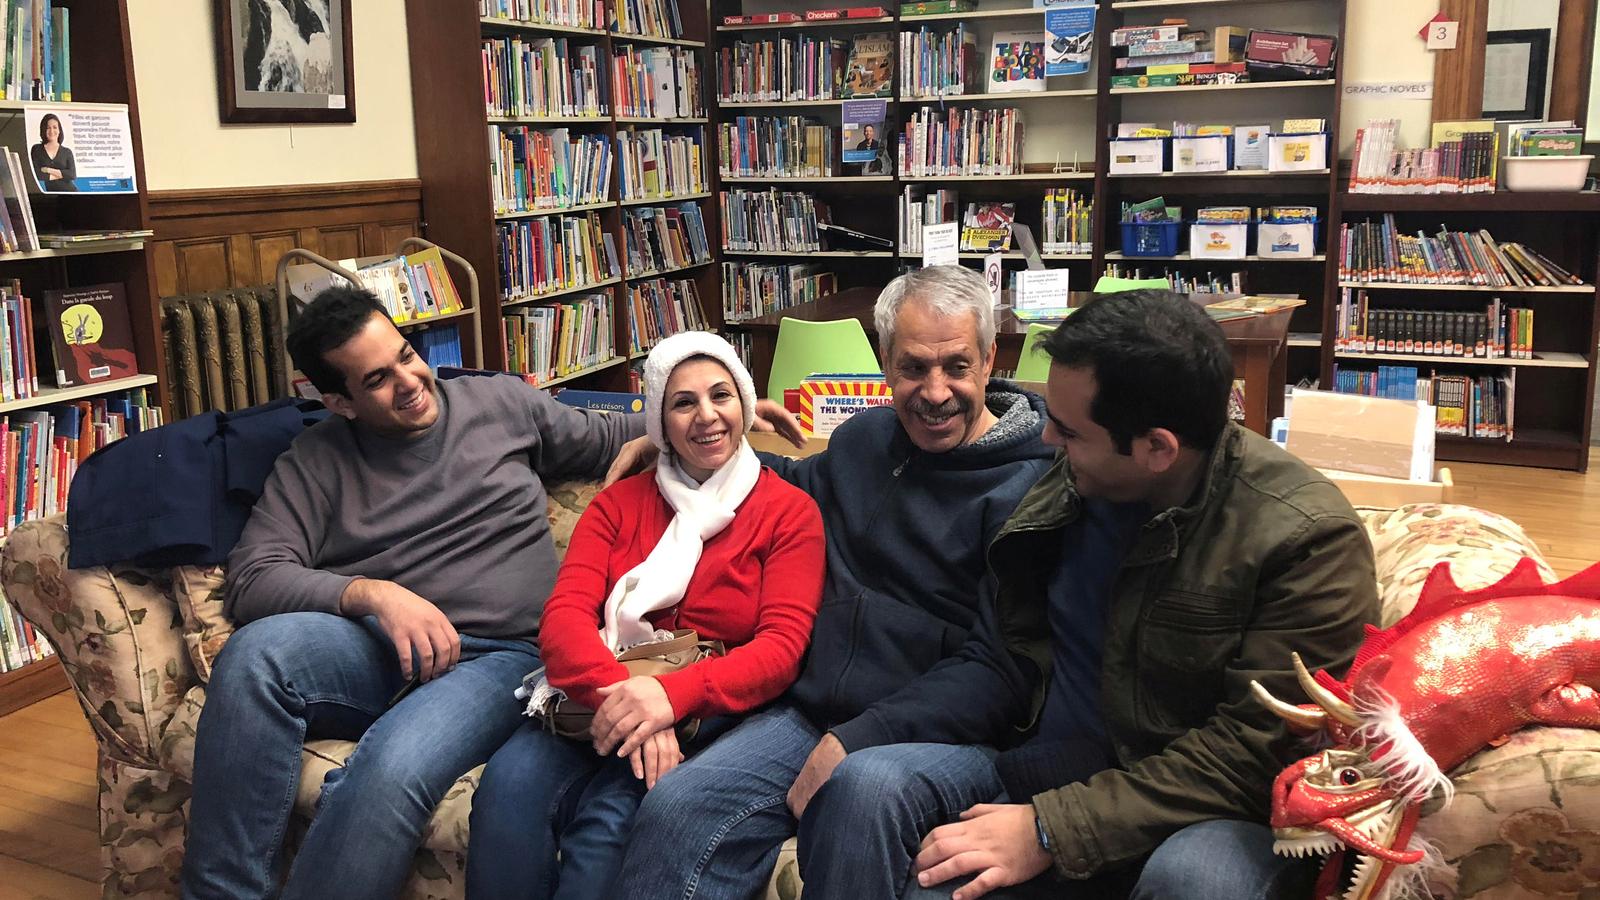 Iranian family reunites on a couch in a library.